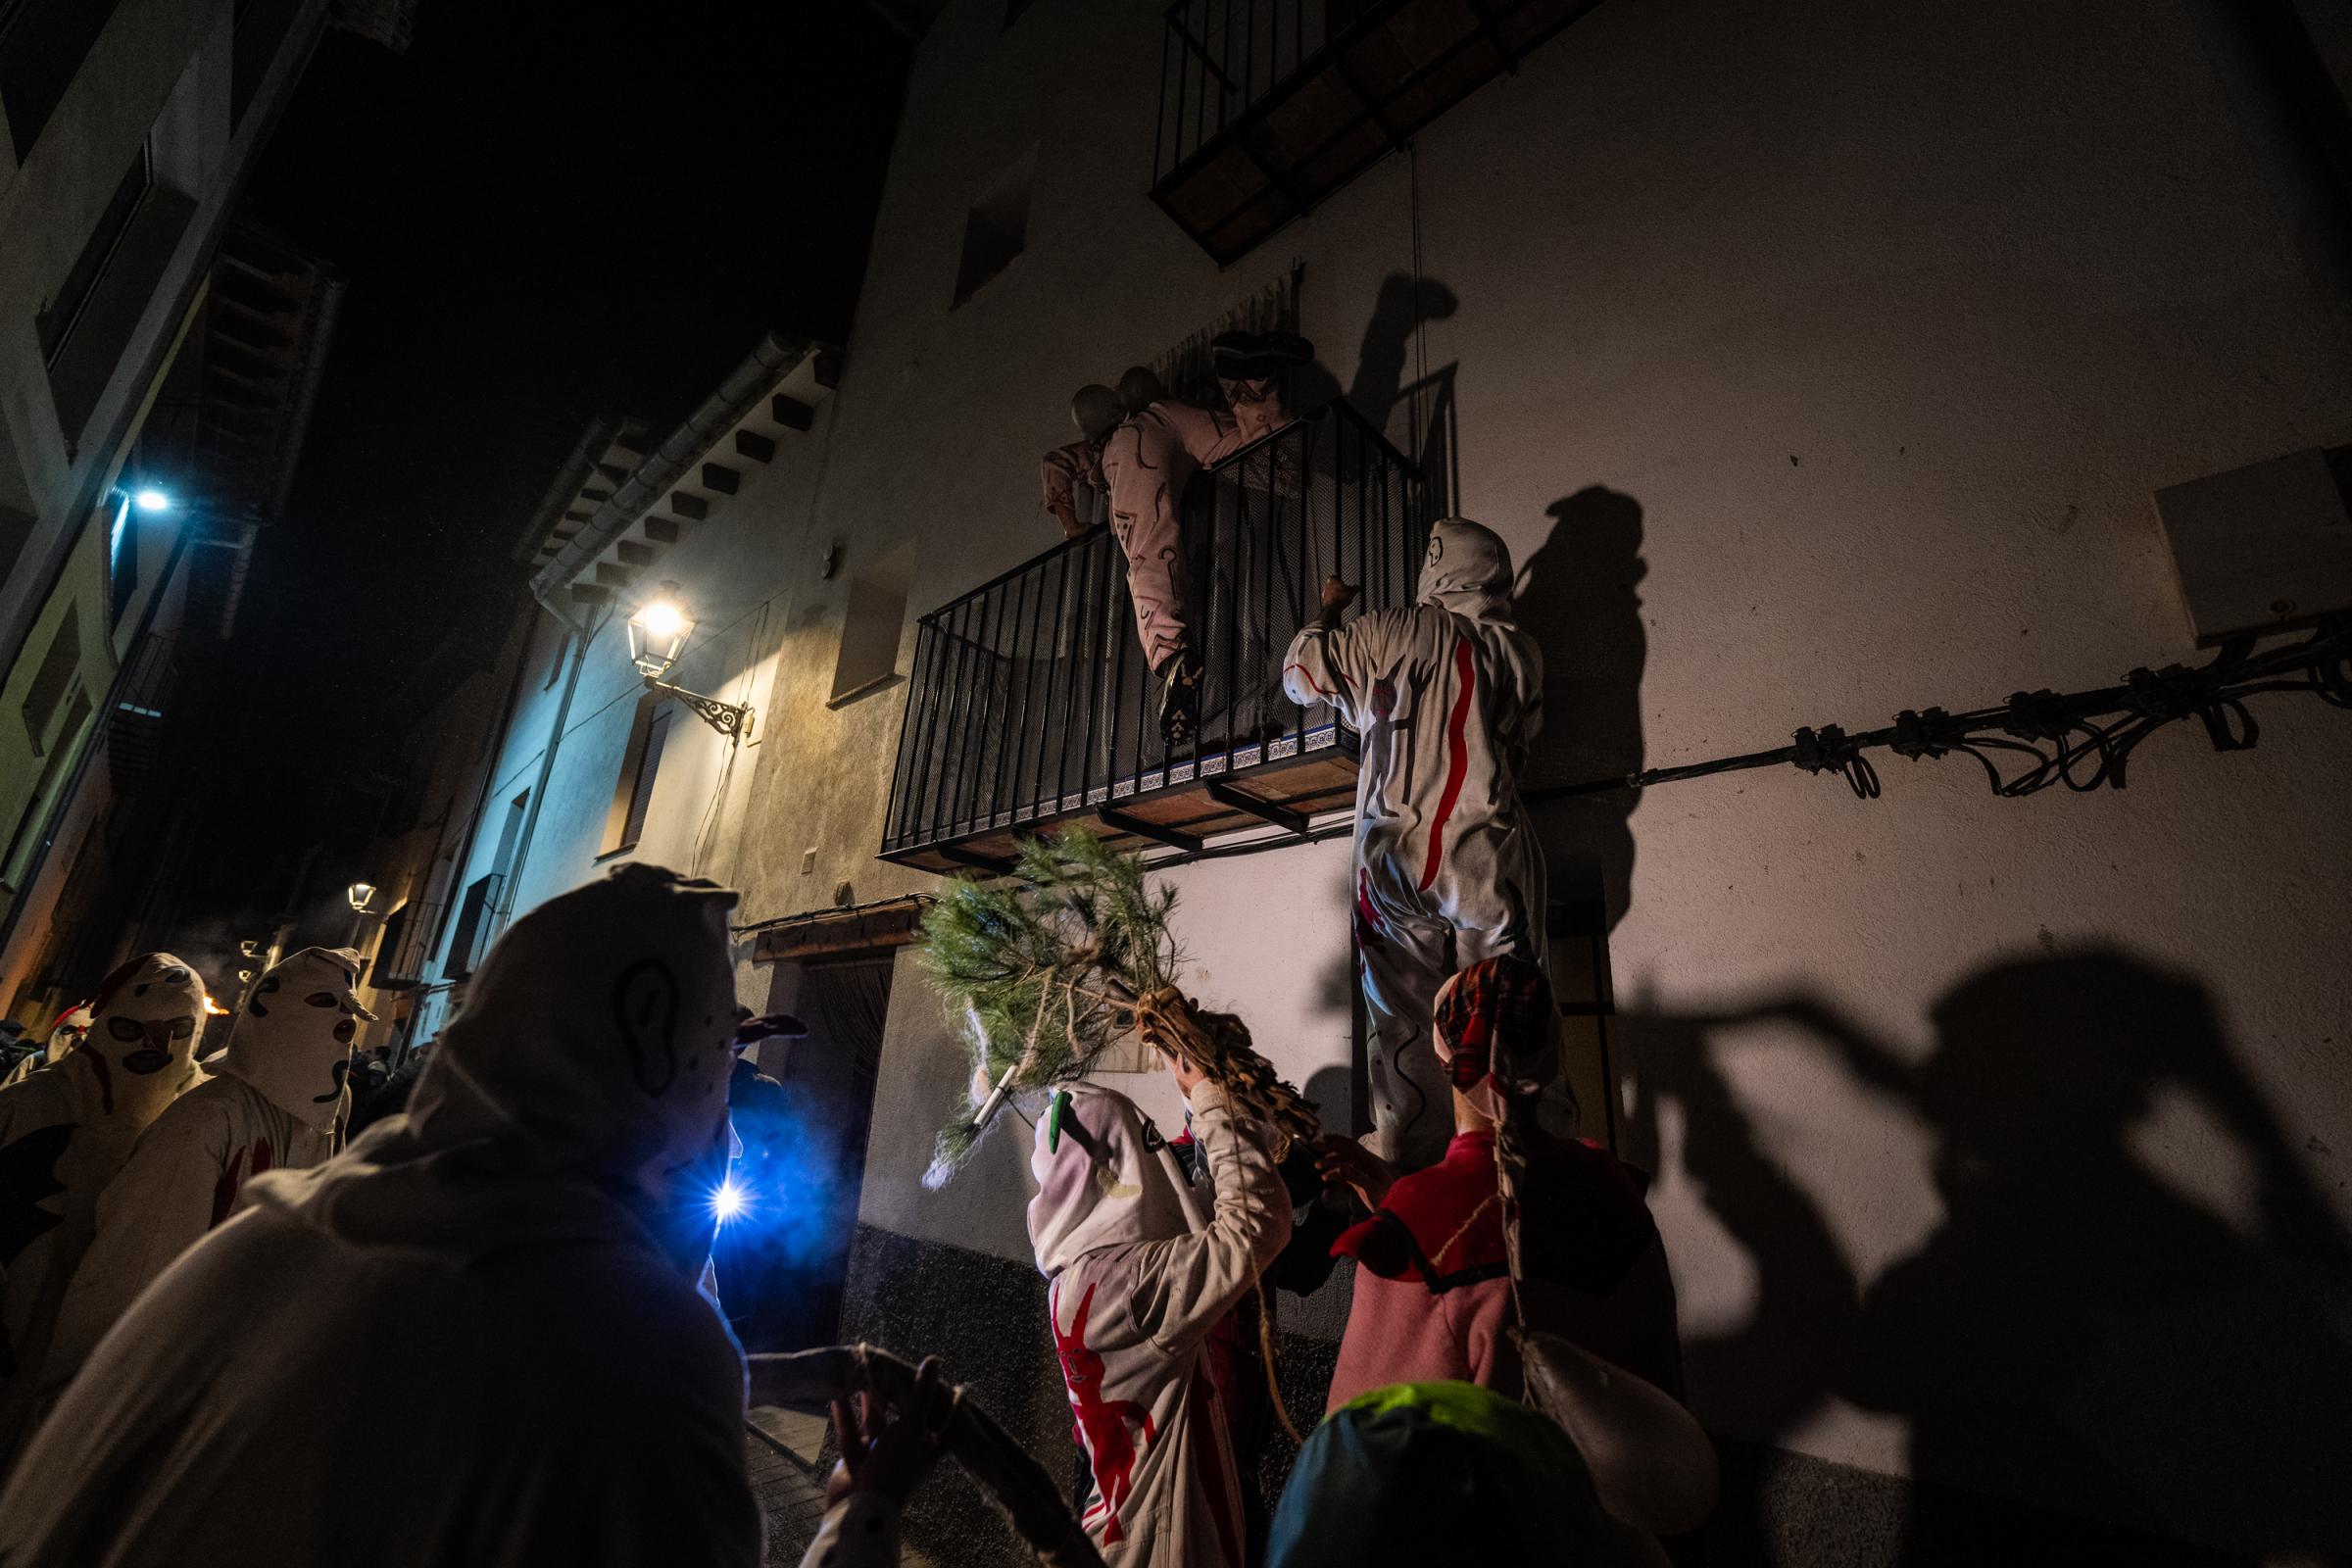 Spanish Villagers Celebrate The Santantona de Forcall, A Medieval Fire Festival - FORCALL, SPAIN - JANUARY 19: The participants of the...